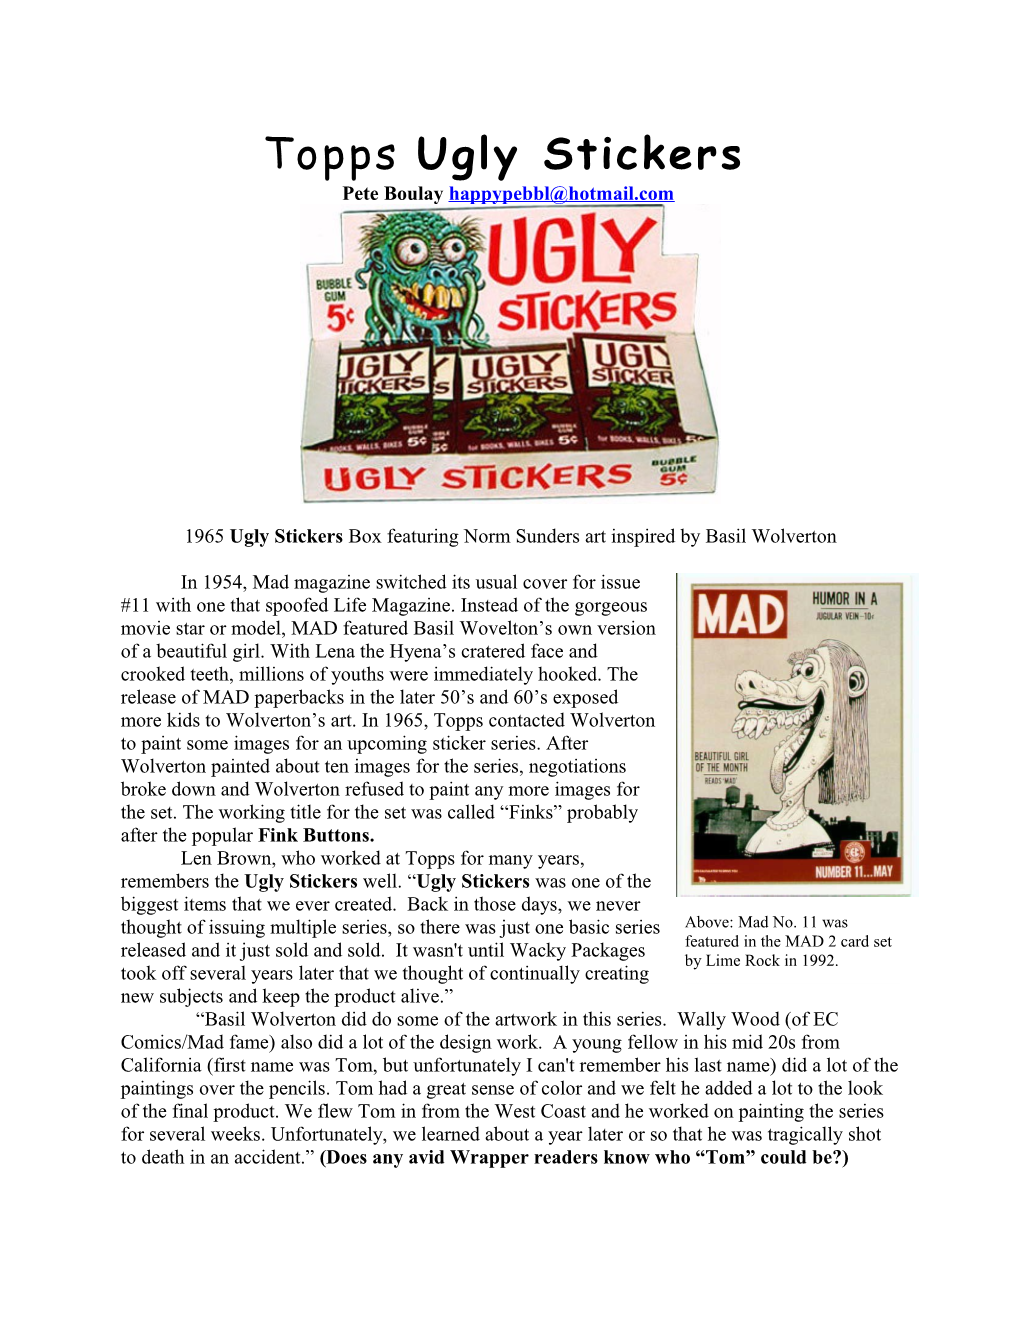 Topps Ugly Stickers